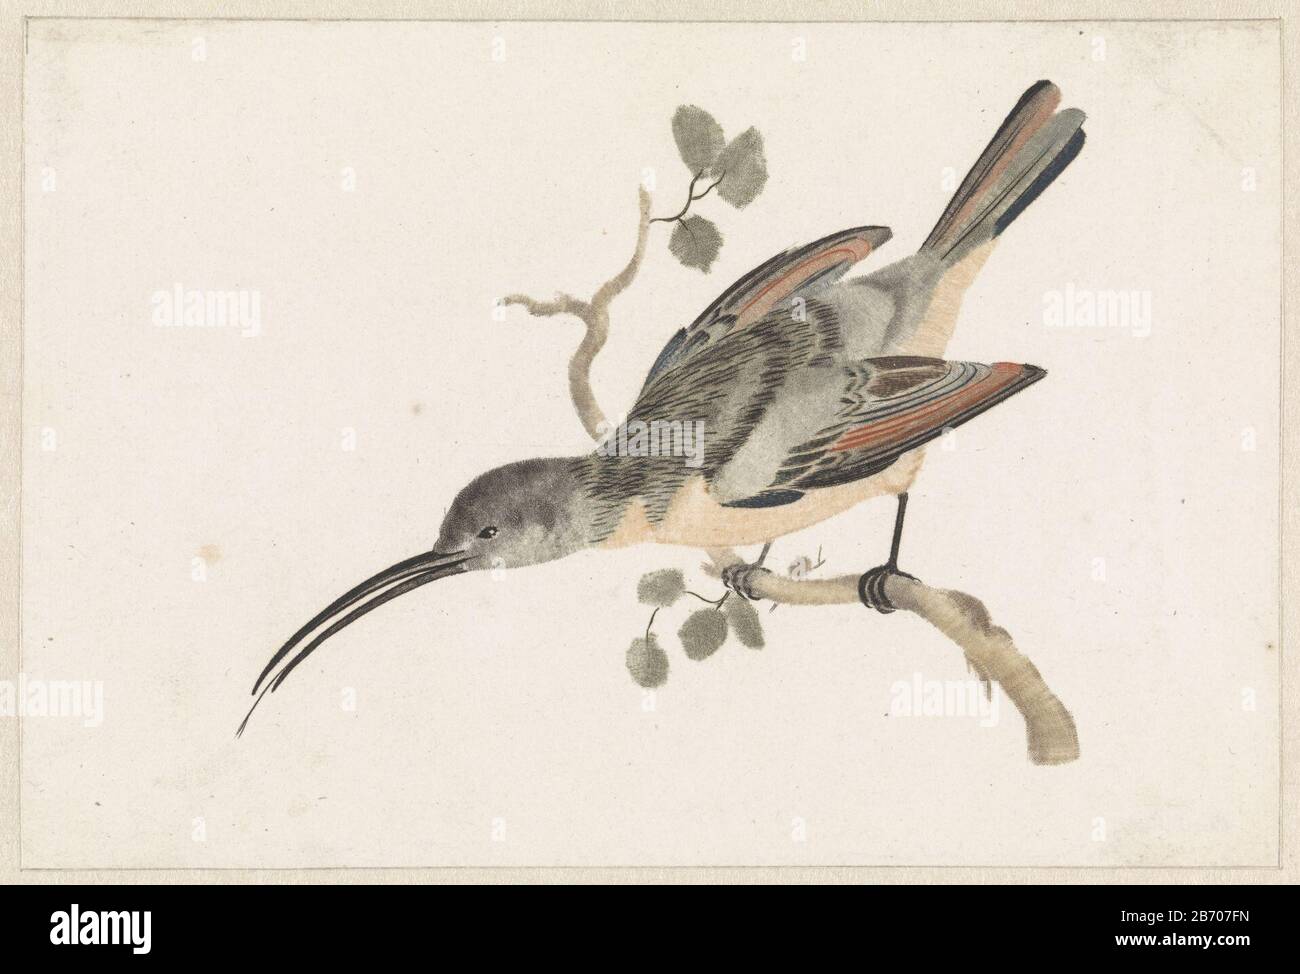 Kolibrie op een tak naar links Hummingbird on a branch to the left object type: picture Item number: RP-P-1882-A 5531 Inscriptions / Brands: collector's mark, verso, stamped (twice) Lugt 2228 Manufacturer : printmaker: anonymous supervision Johan Teylerstraat Place manufacture: Netherlands Date: 1688 - 1698 Physical features: engra and mezzotint à la poupée in red, blue, yellow, green, brown and black material: paper Technique: engra (printing process) / mezzotint / à la poupée / color dimensions: sheet: h 120 mm × W 177 mm Subject: other birds (with NAME) Stock Photo